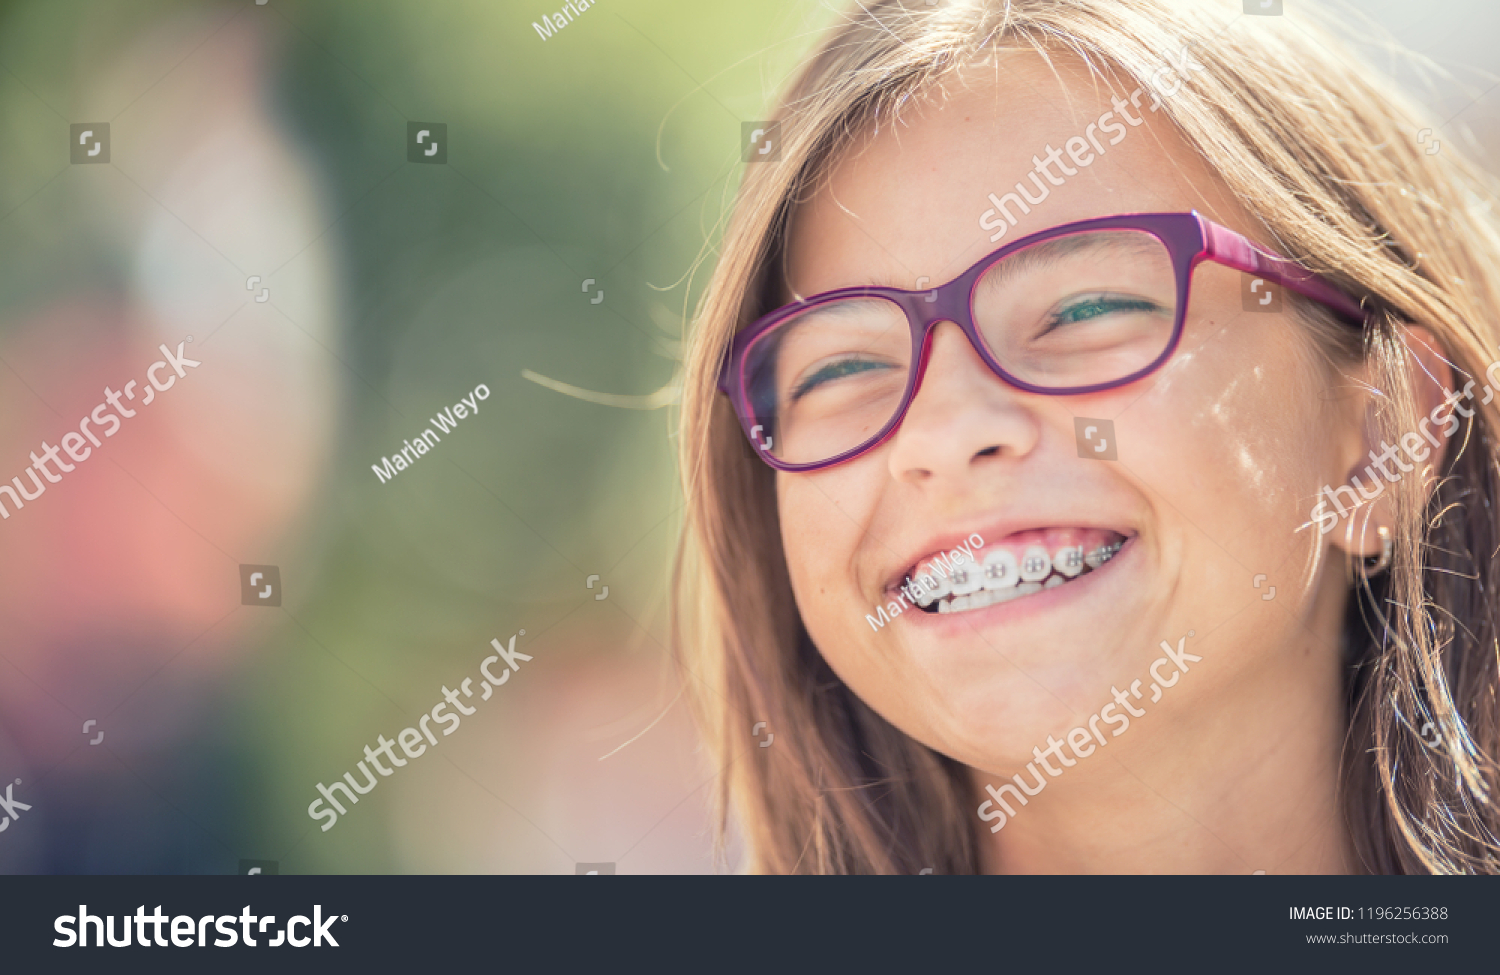 Portrait of a happy smiling teenage girl with dental braces and glasses. #1196256388